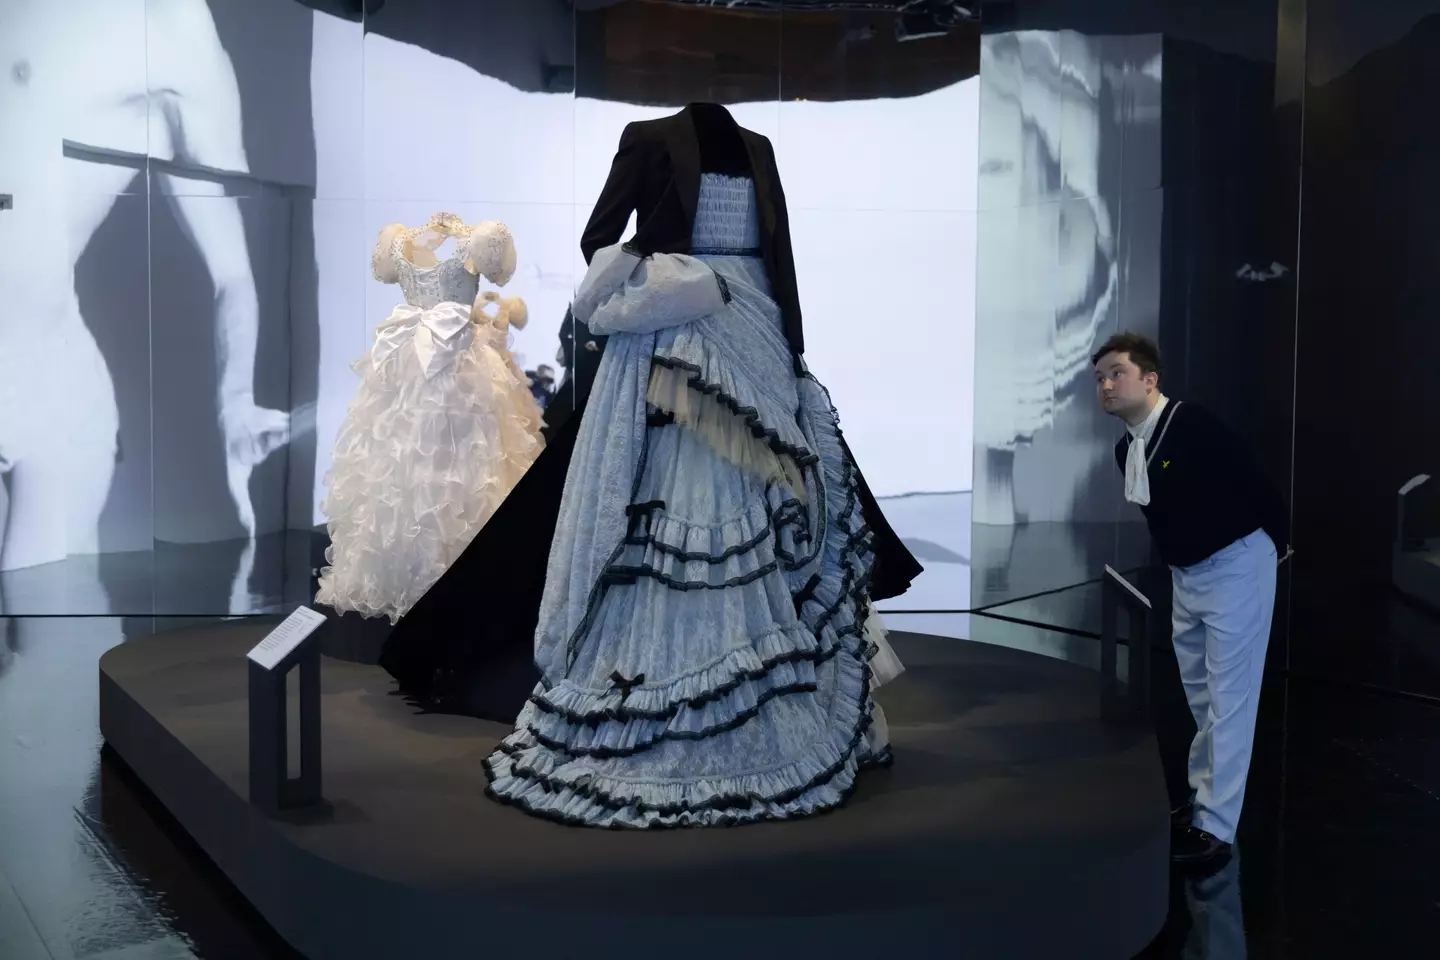 A dress on display after being worn by Harry Styles.